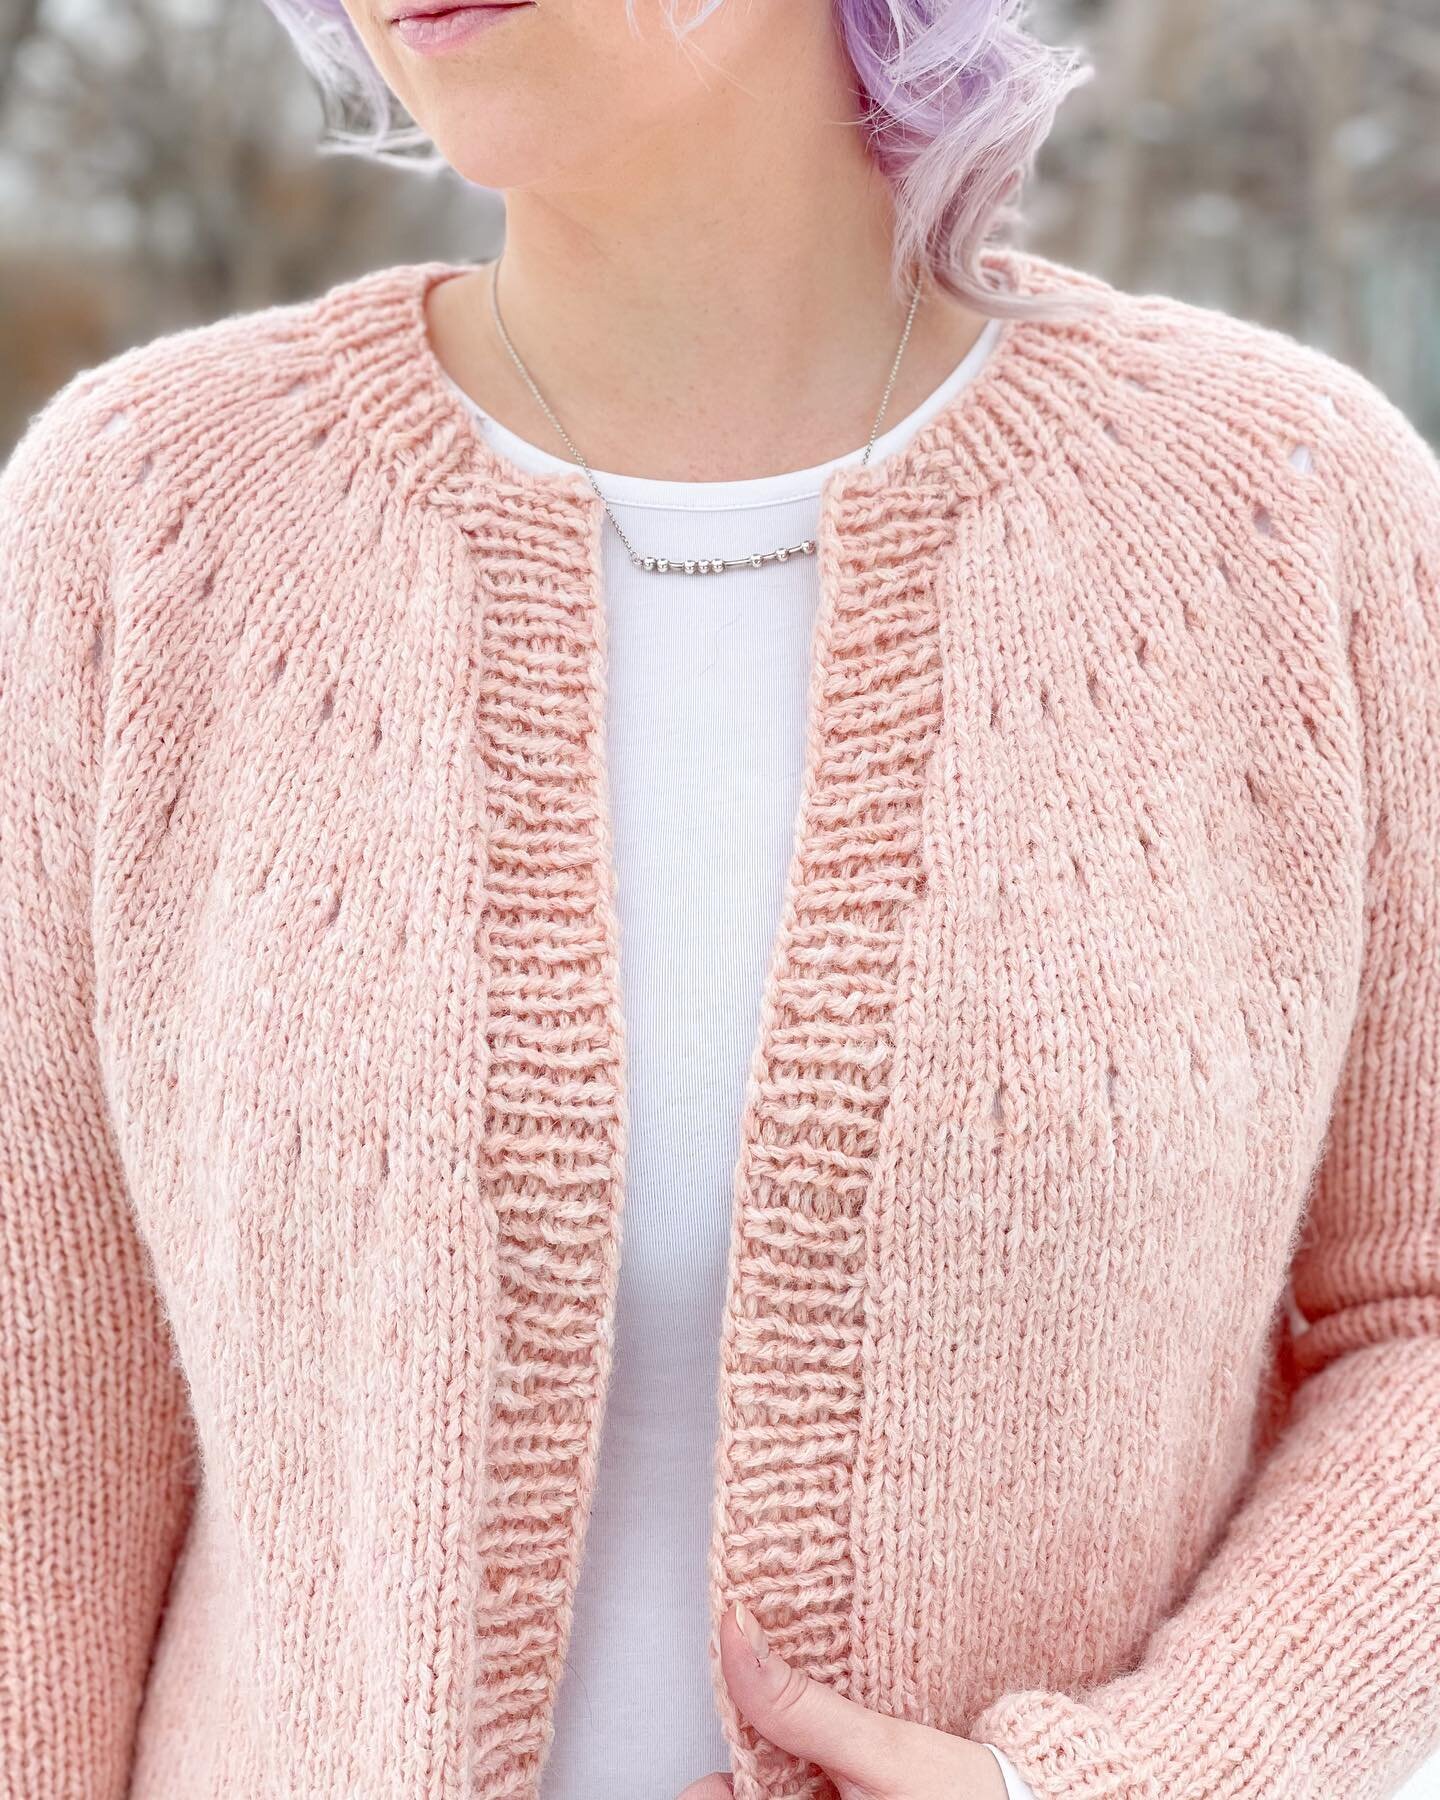 EASY EYELET KAL!

After many requests we are going to do an Easy Eyelet knit-a-long. I&rsquo;m still putting together the details, but here&rsquo;s few of them: 

Starting April 9th and going 7 weeks, choose from one of the four options:

1) #EasyEye